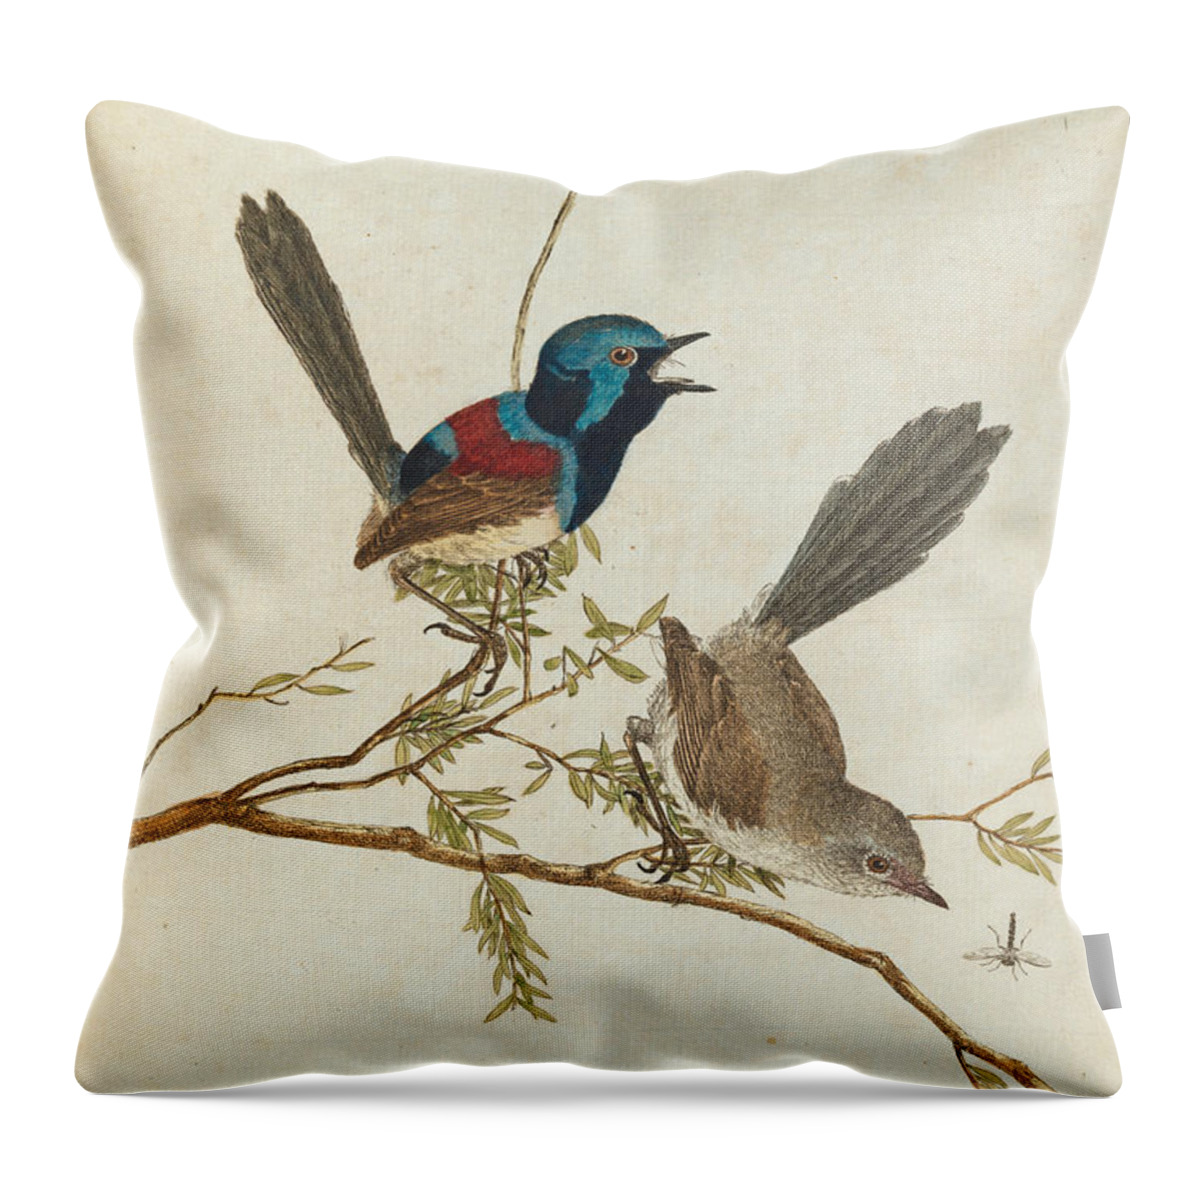 John Lewin Throw Pillow featuring the drawing Variegated Warbler by John Lewin